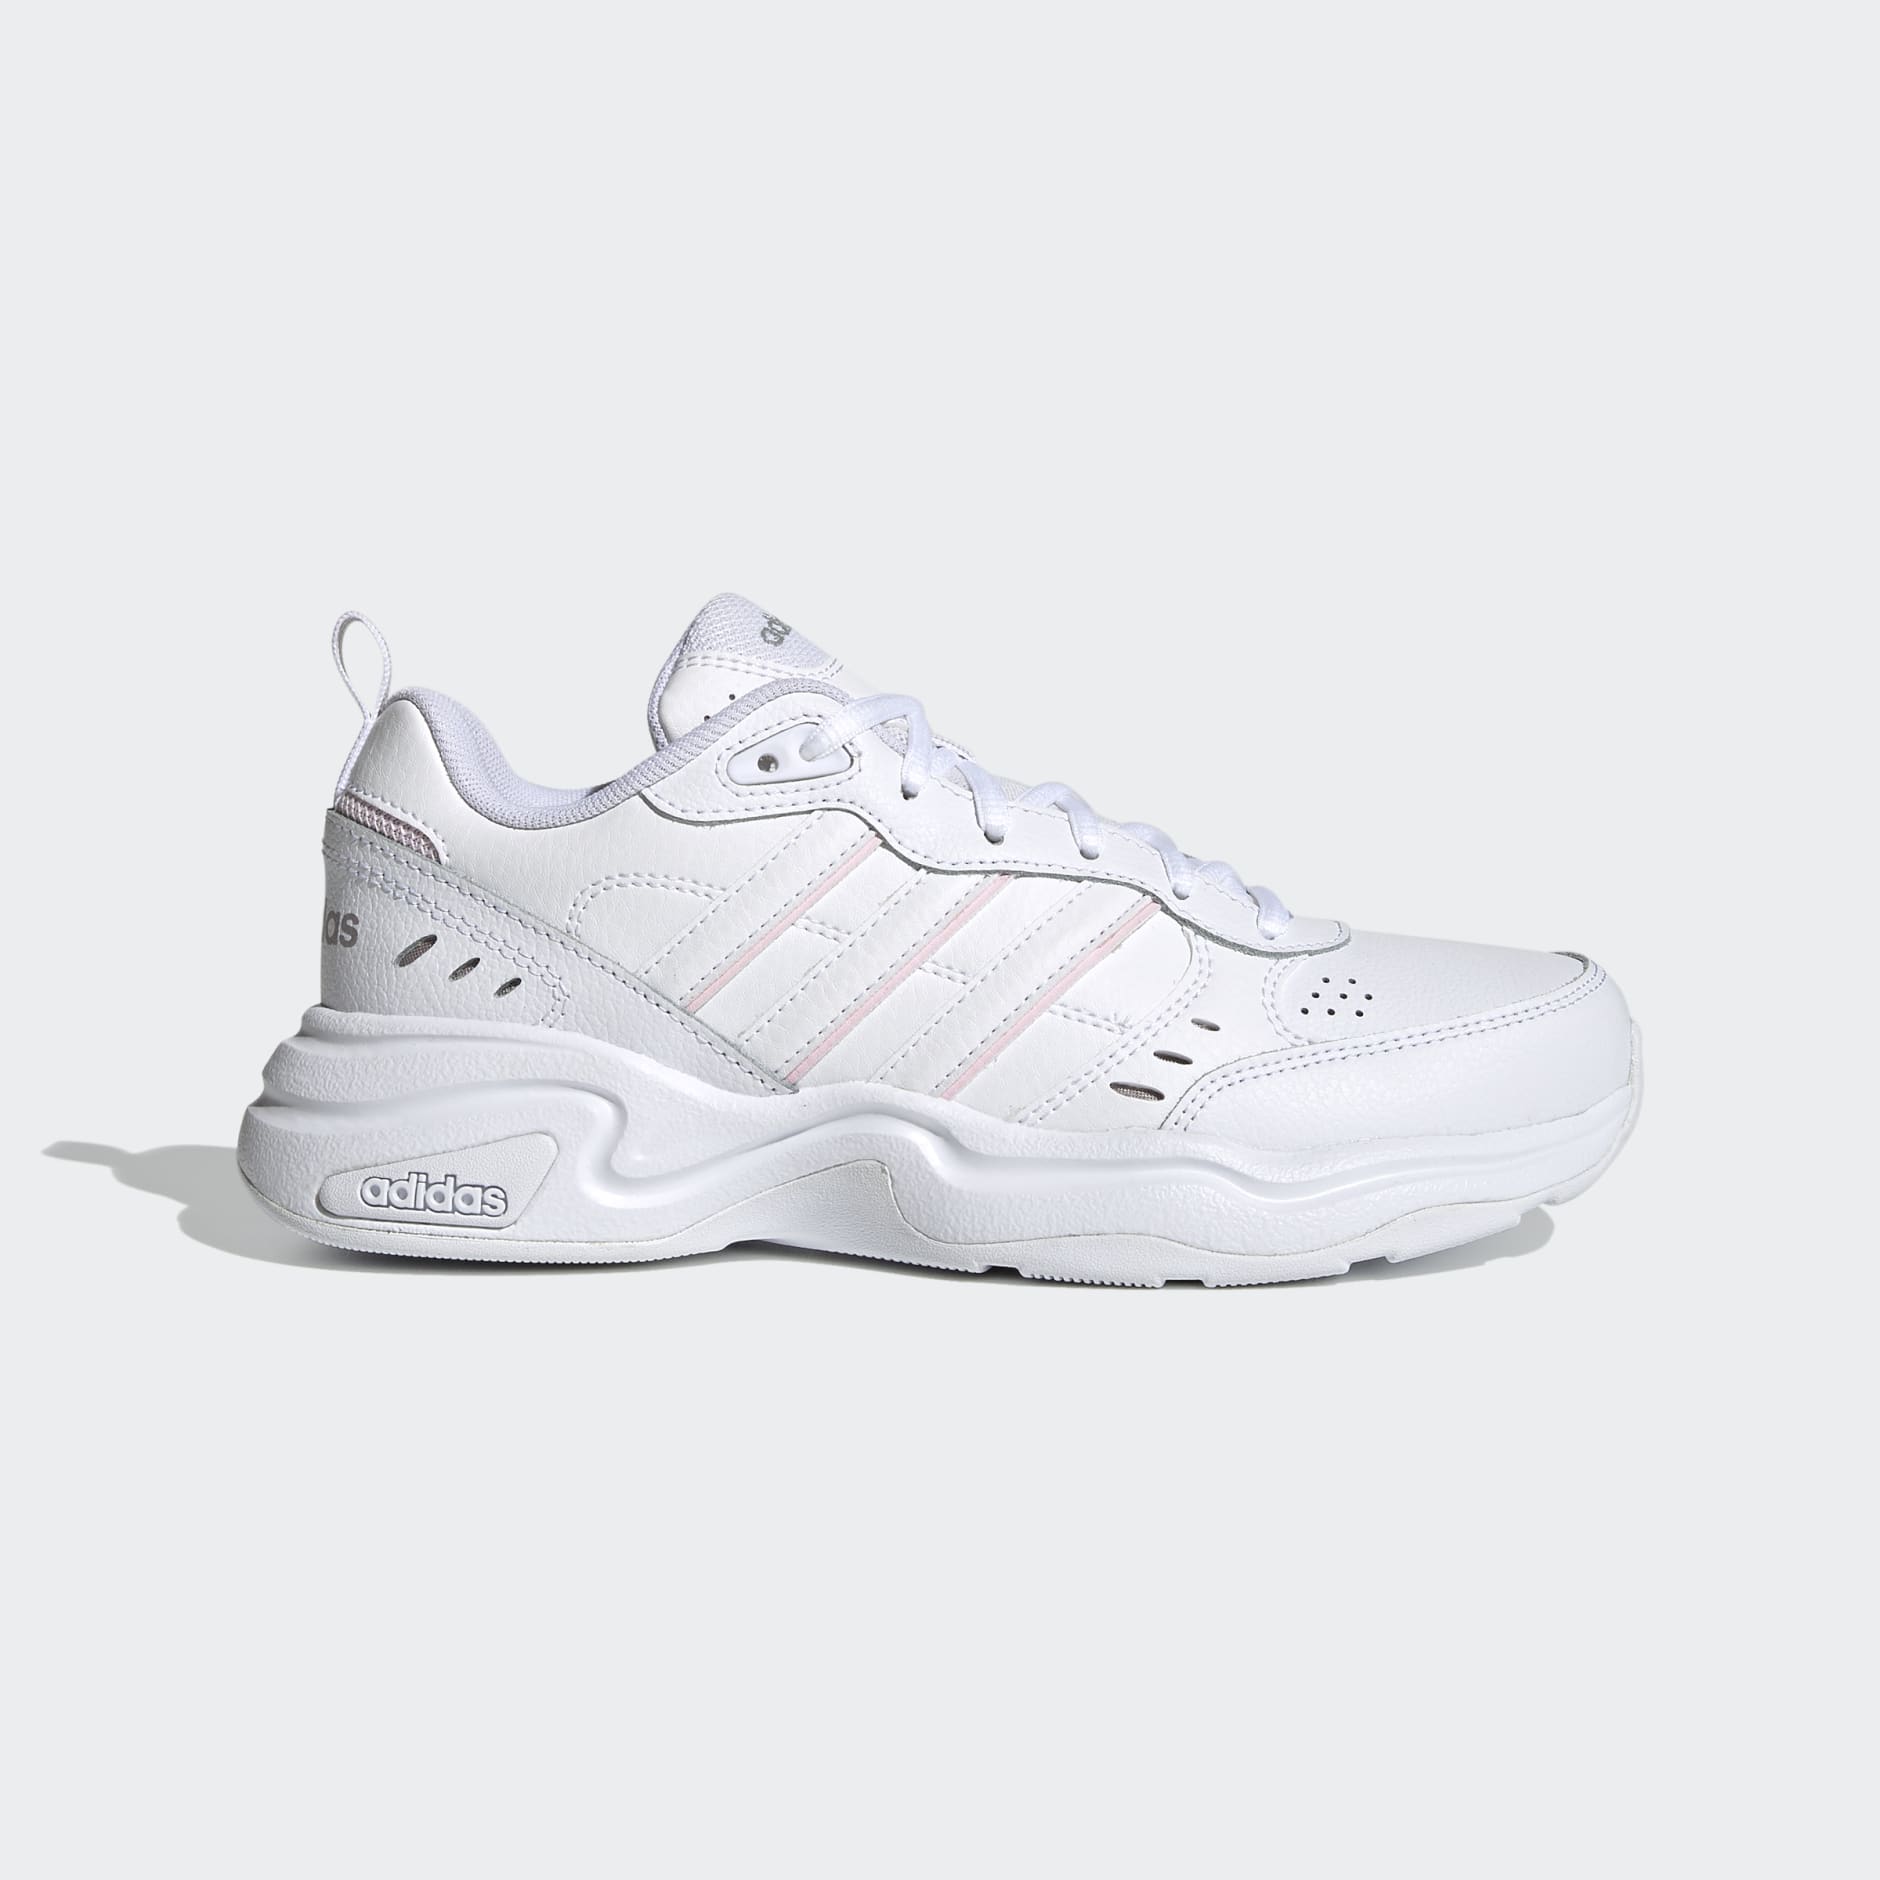 adidas Strutter Shoes - White | adidas GH